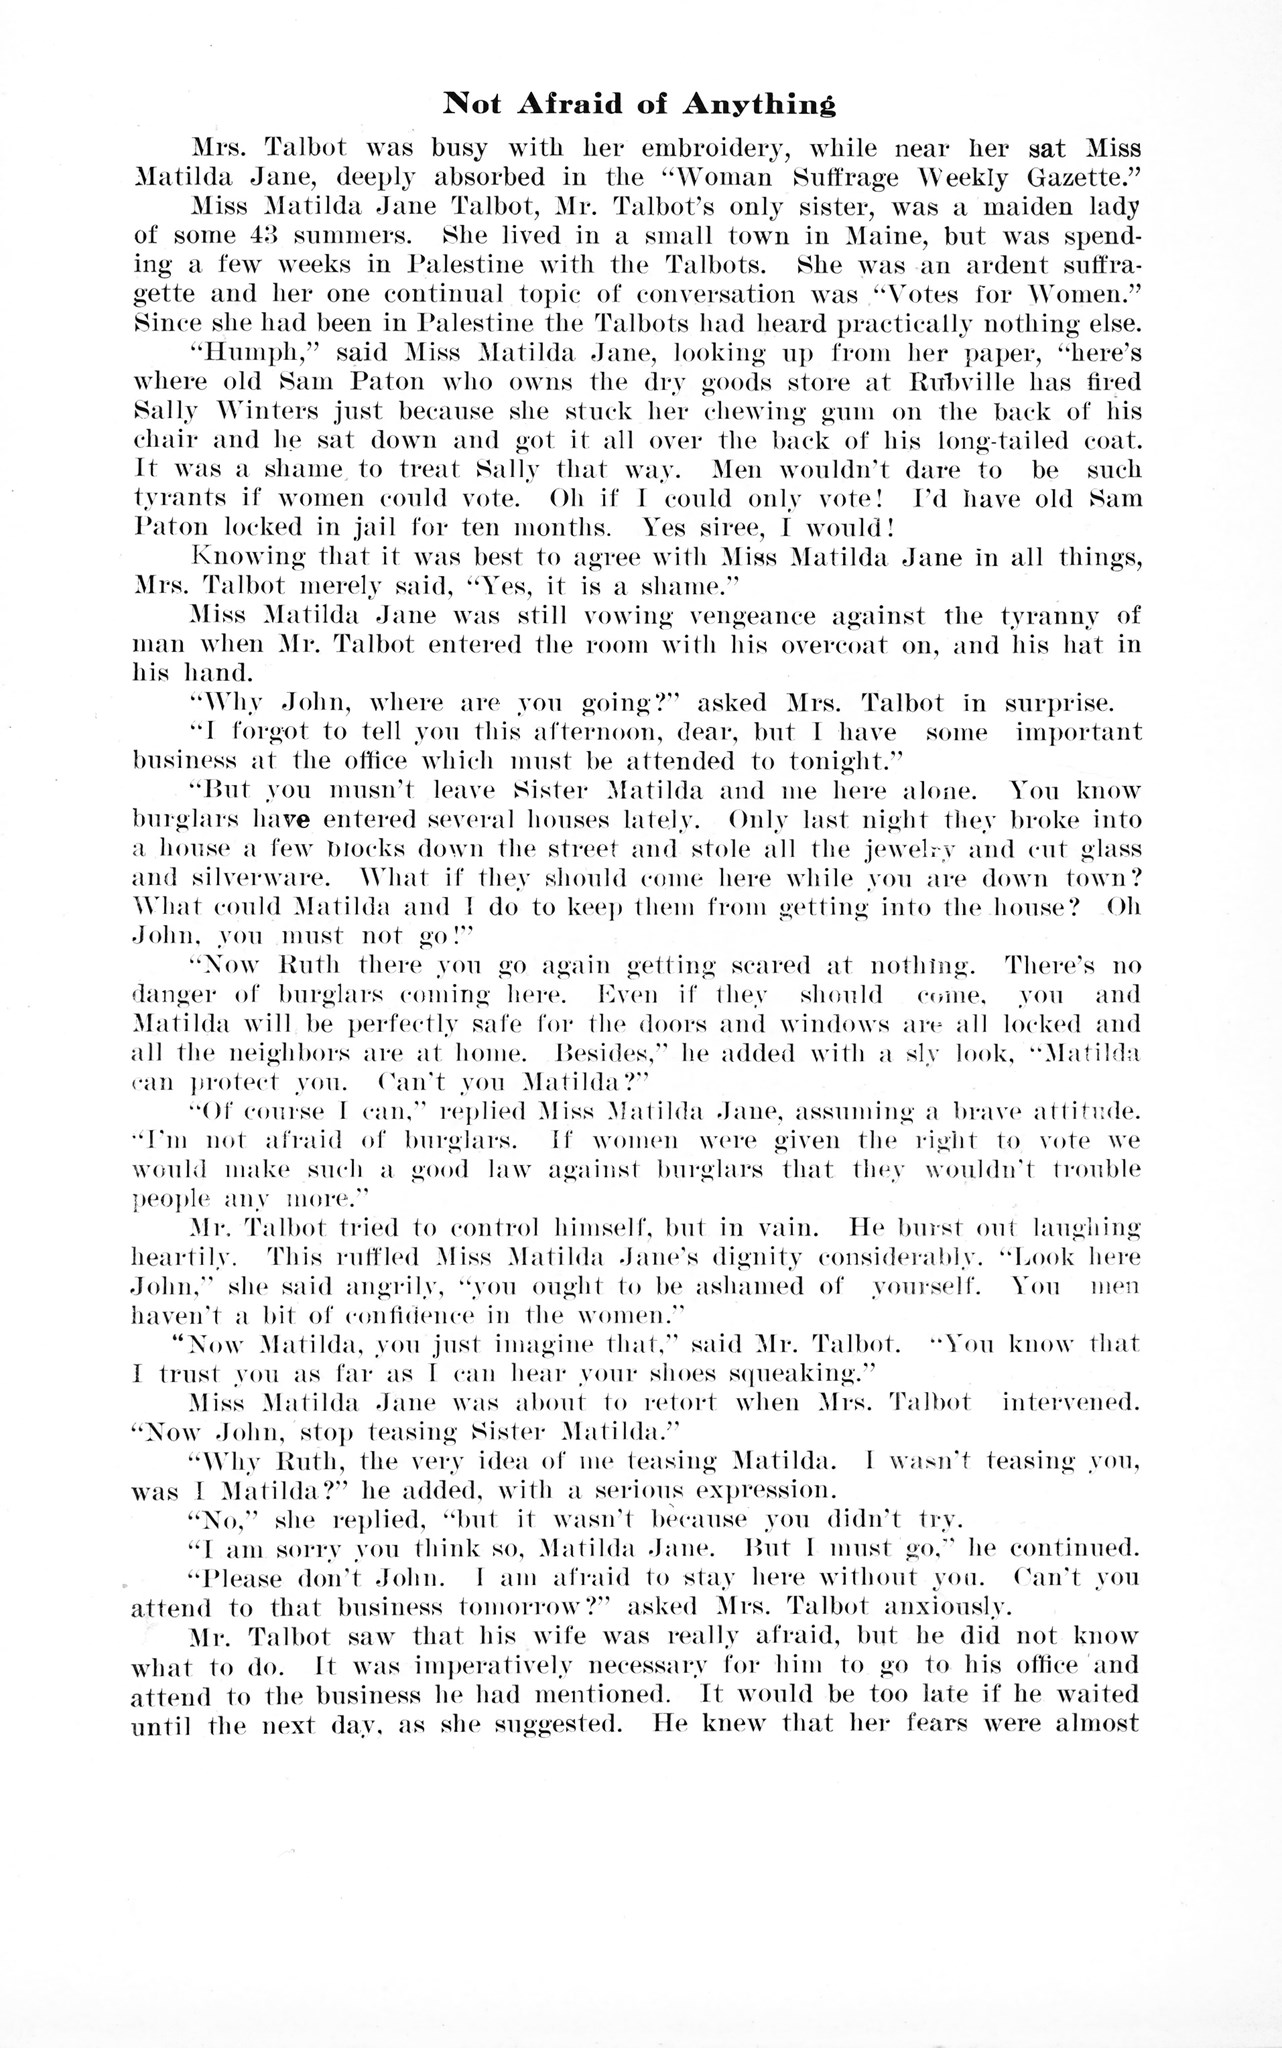 ../../../Images/Large/1913/Arclight-1913-pg0077.jpg